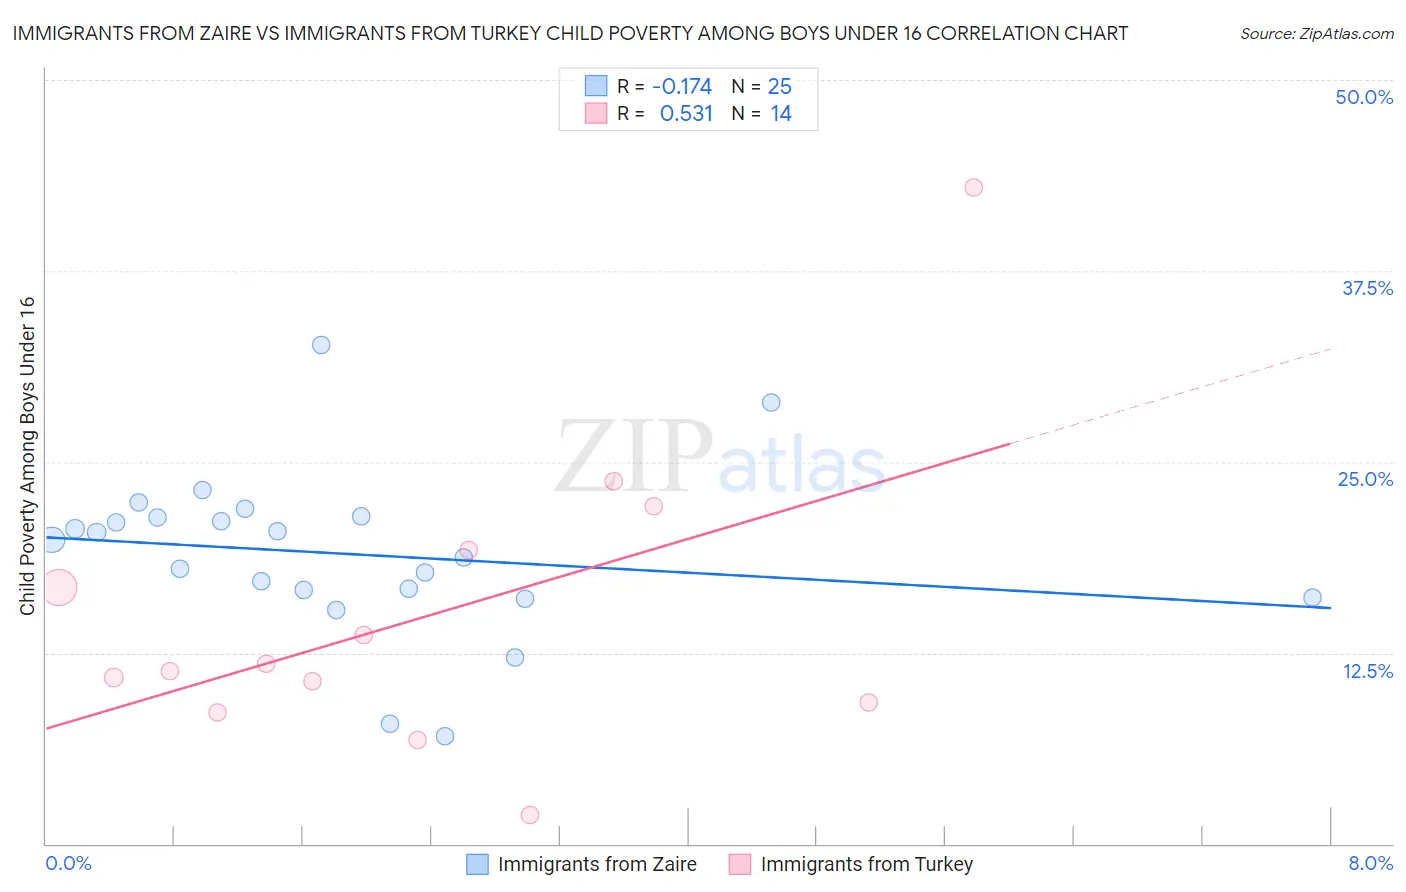 Immigrants from Zaire vs Immigrants from Turkey Child Poverty Among Boys Under 16